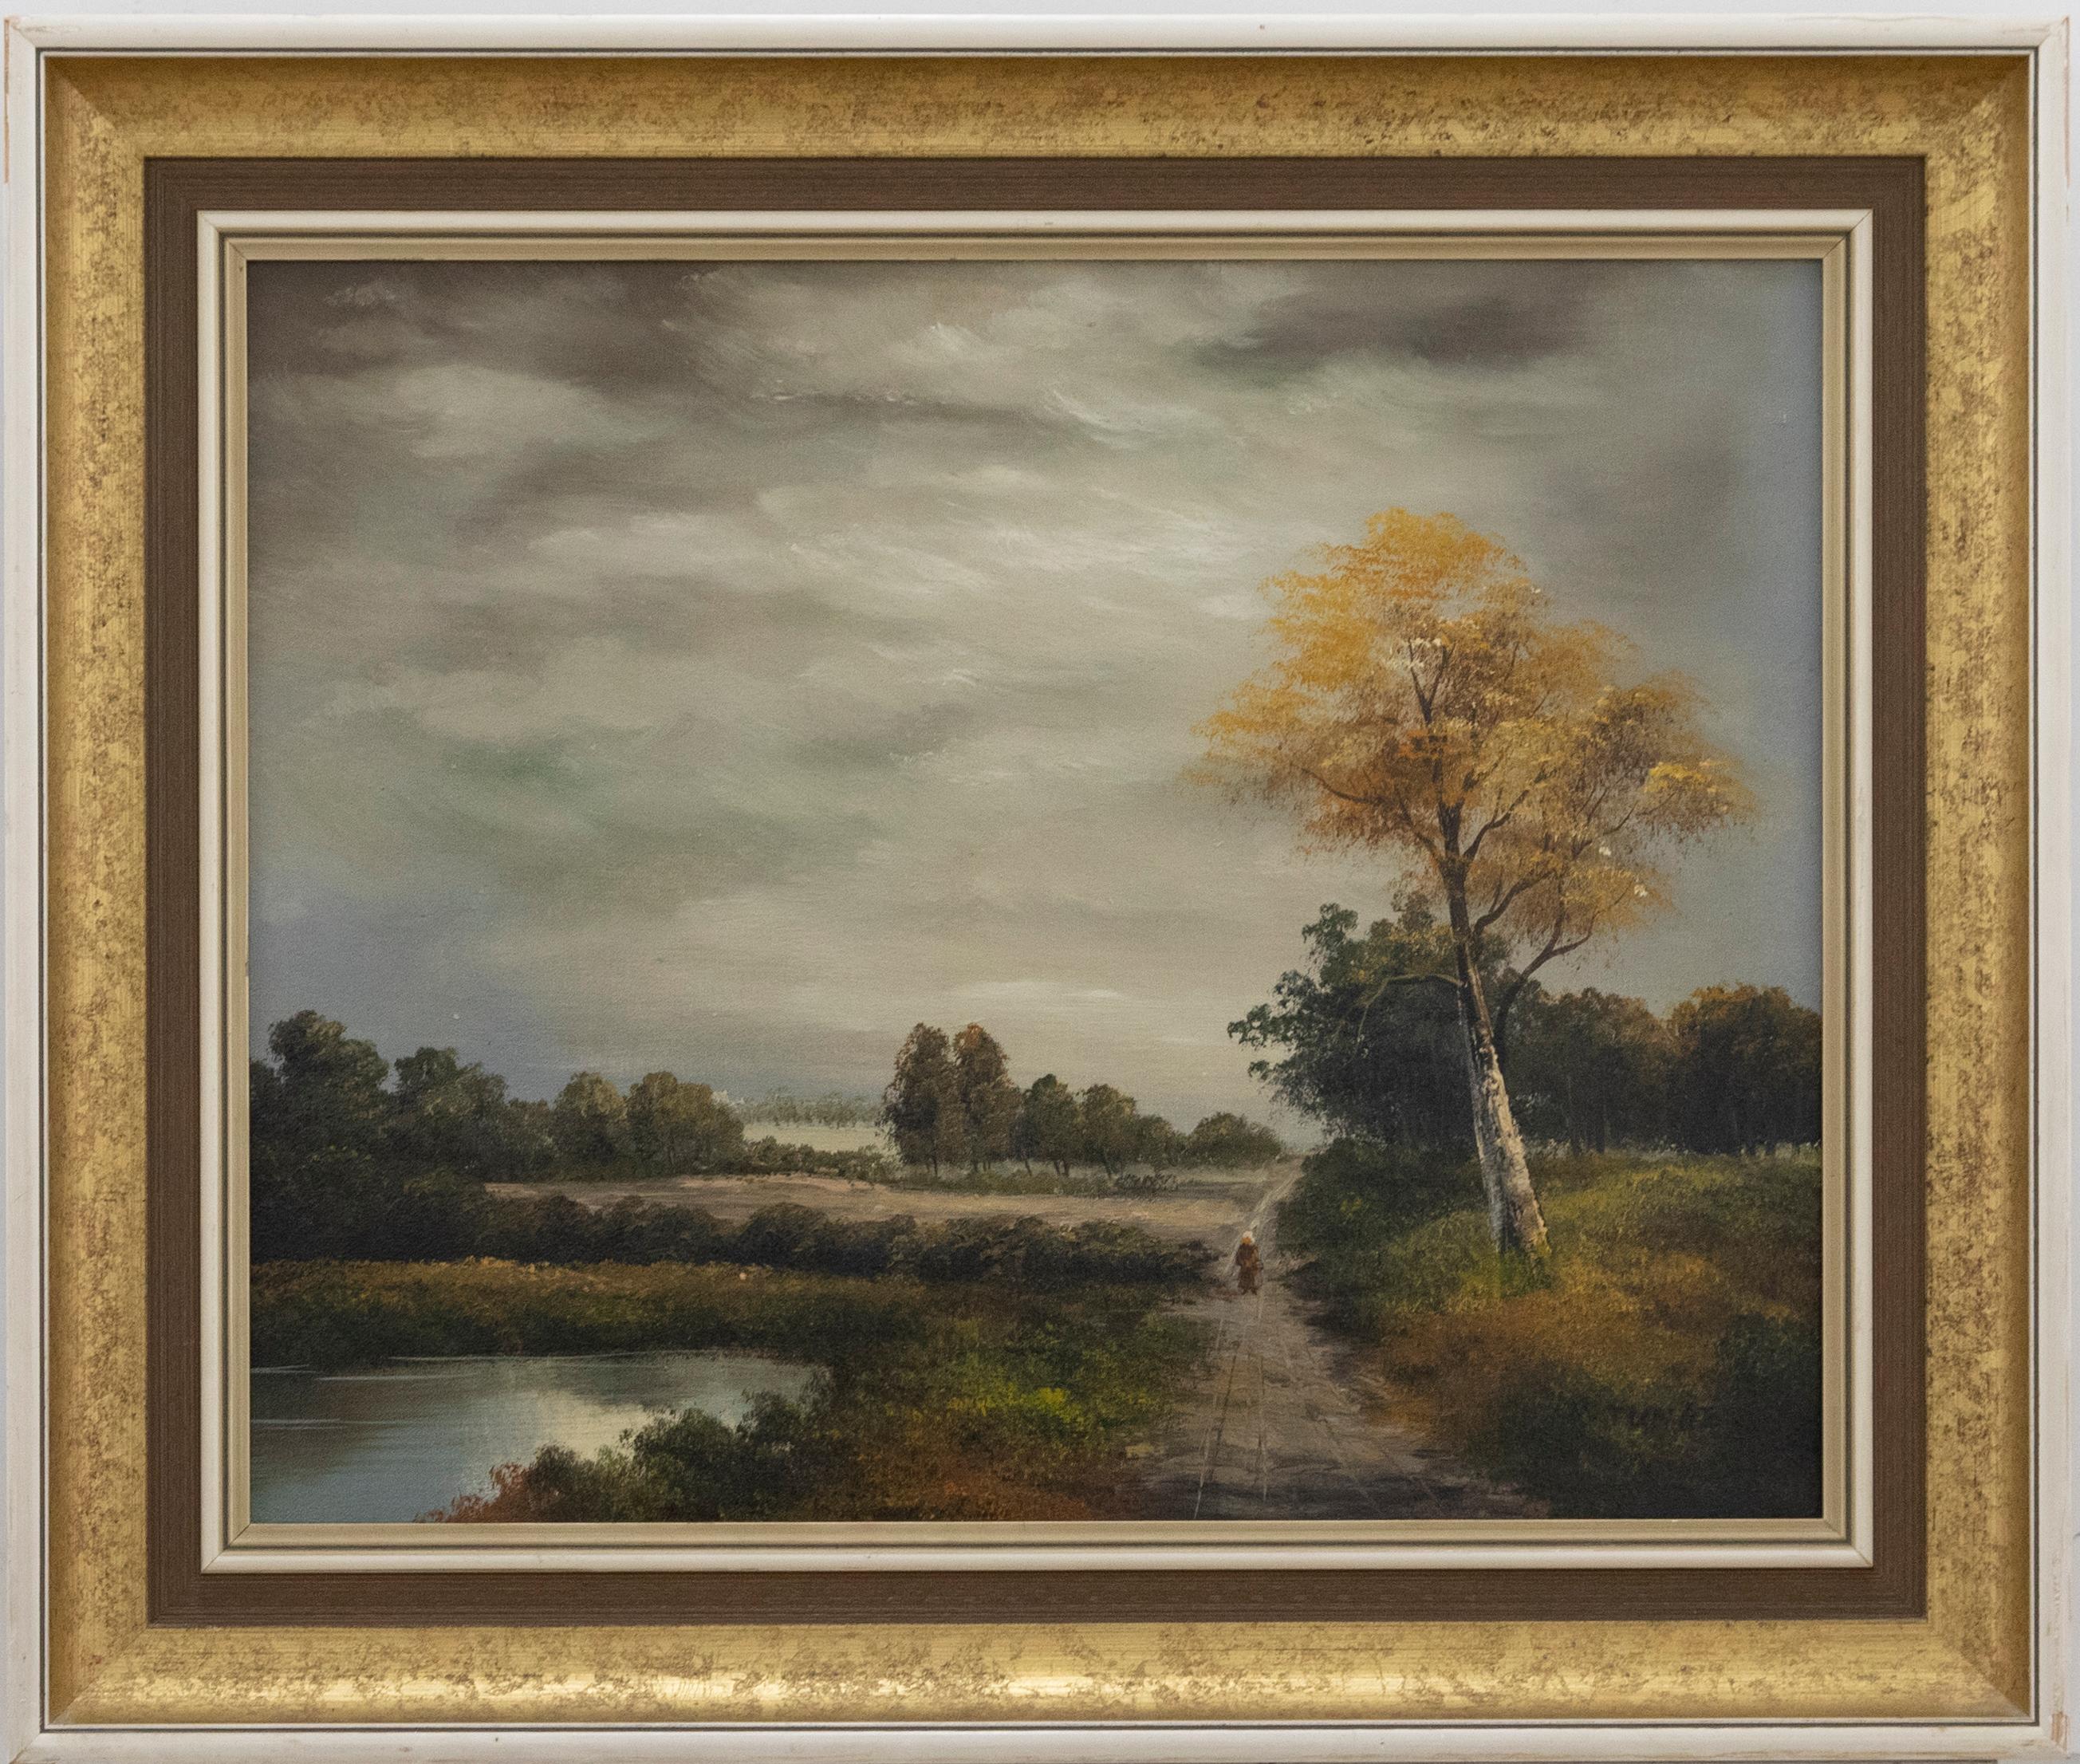 A charming country scene depicting a lone figure strolling down a sunlit path by a lake. Unsigned. Presented in a wooden frame with a gilt-effect cove. On canvas.